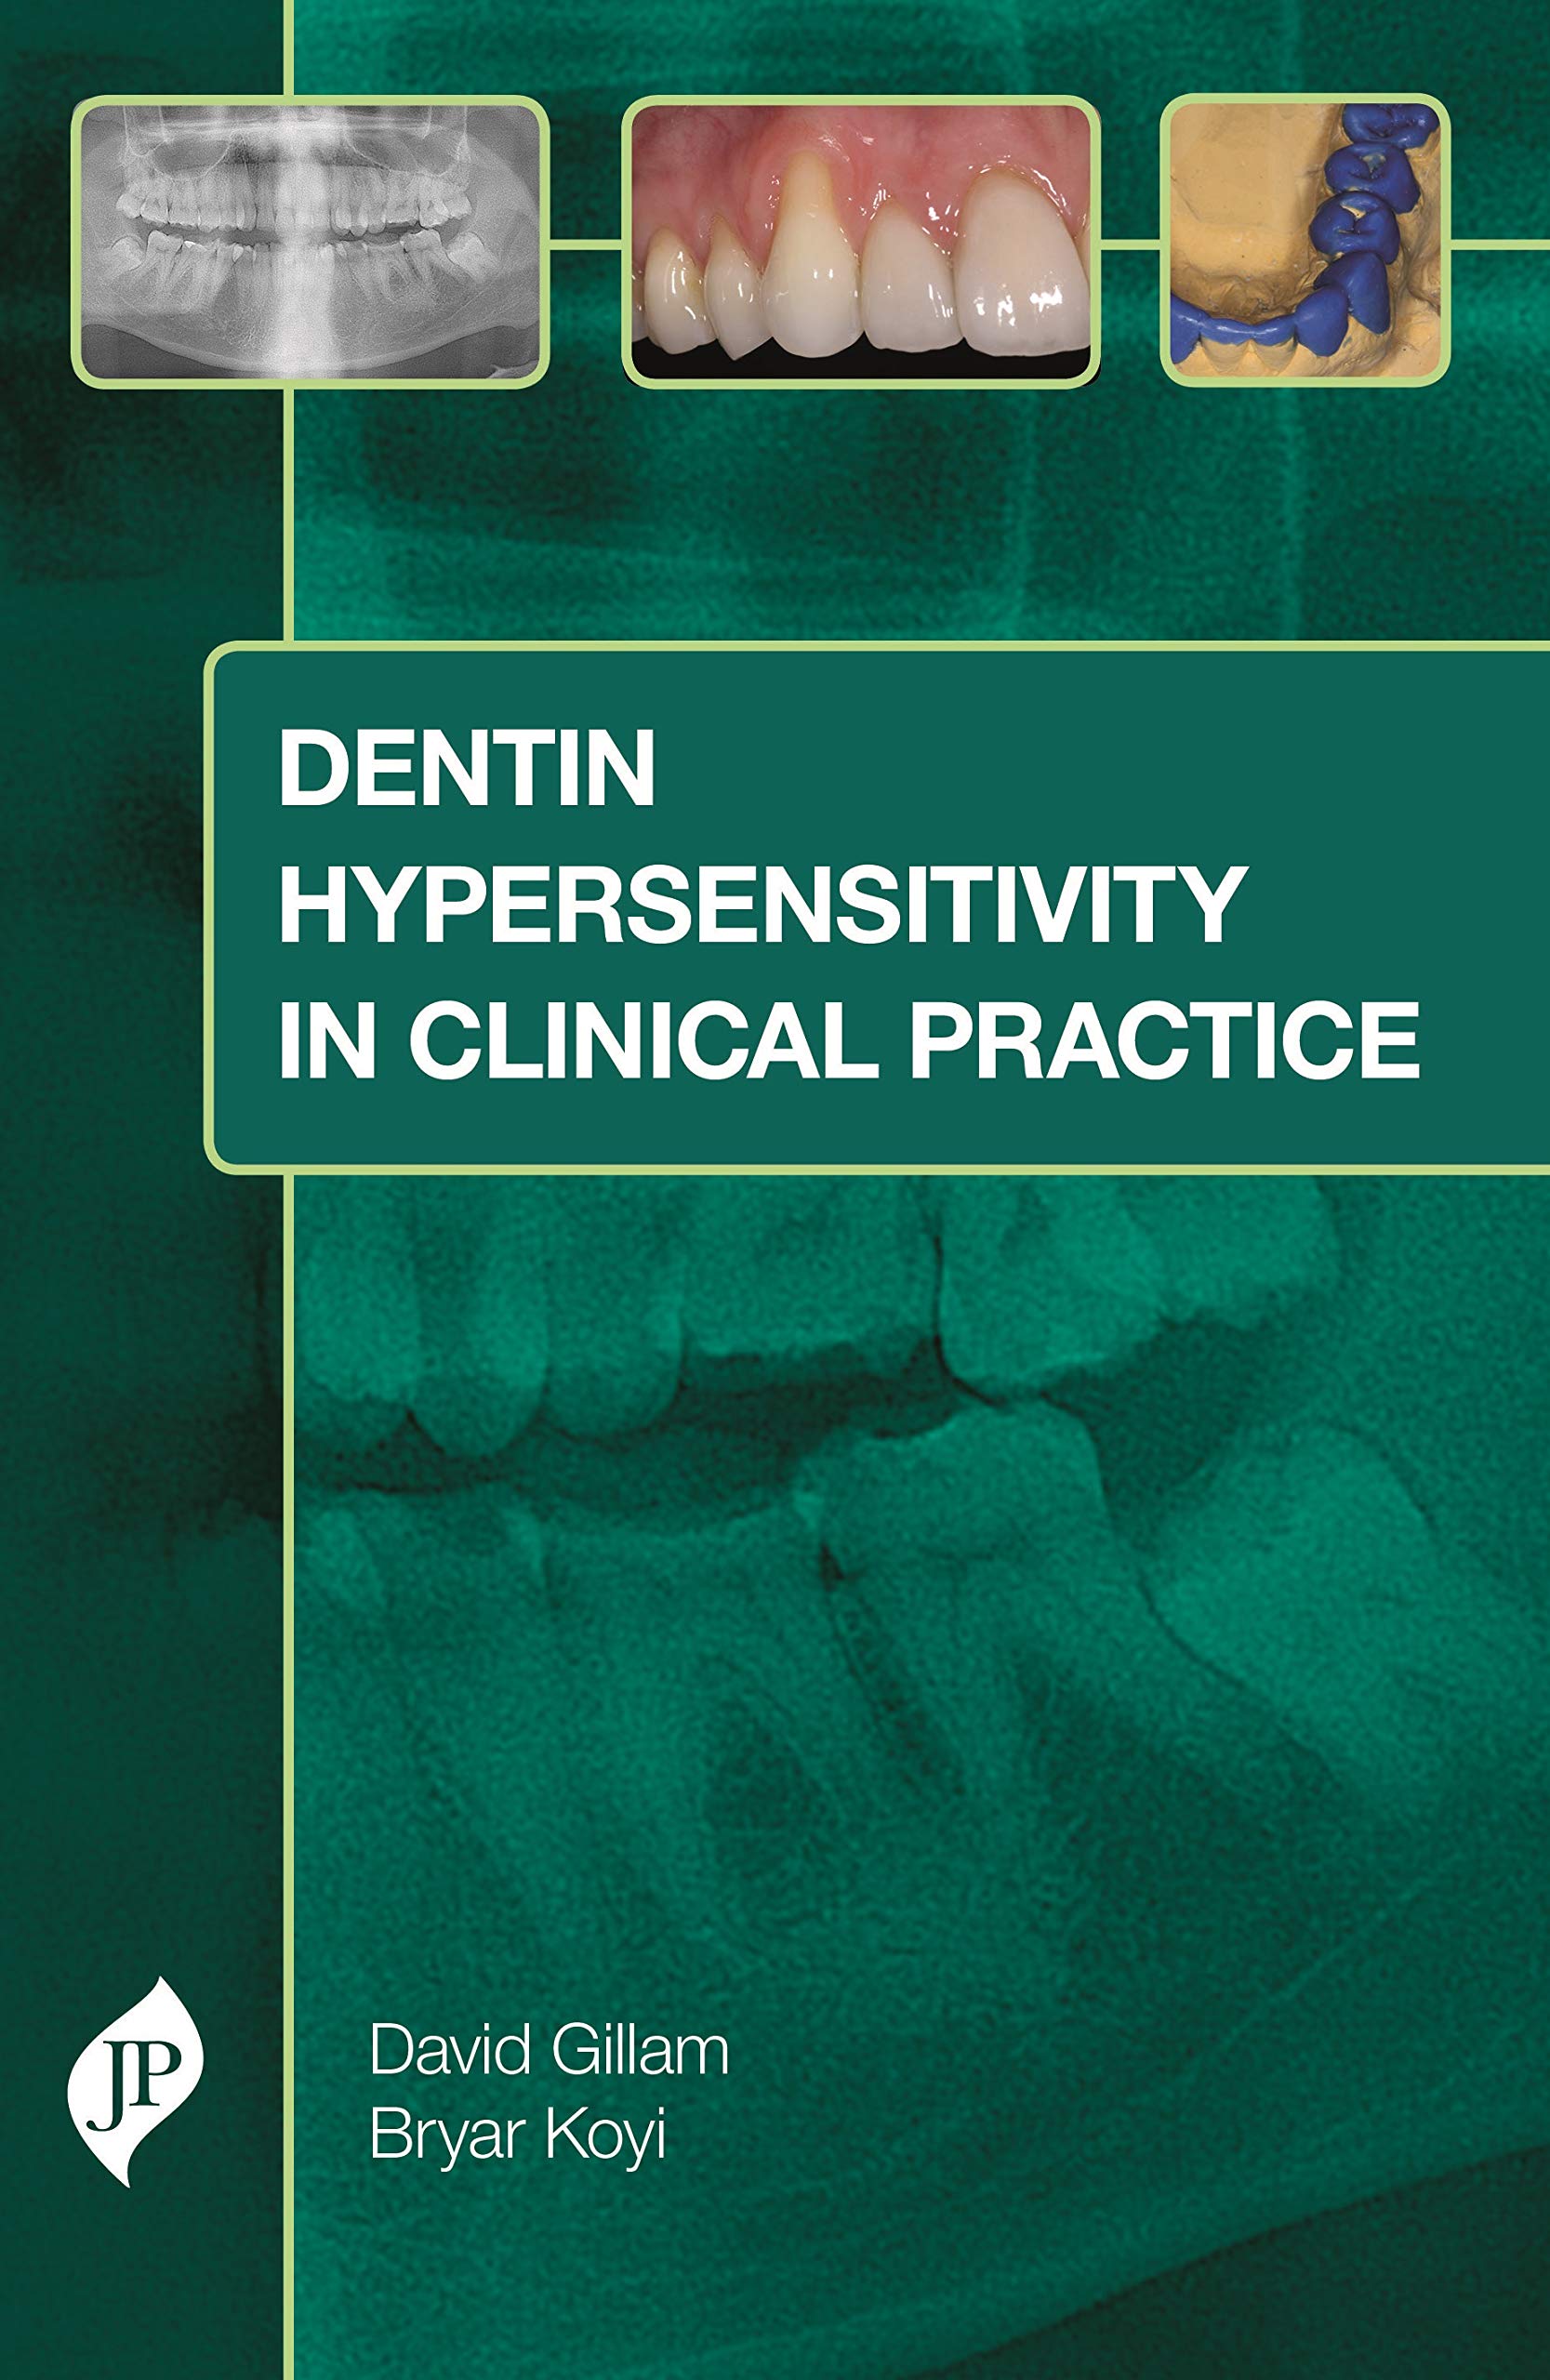 dentin-hypersensitivity-in-clinical-practice